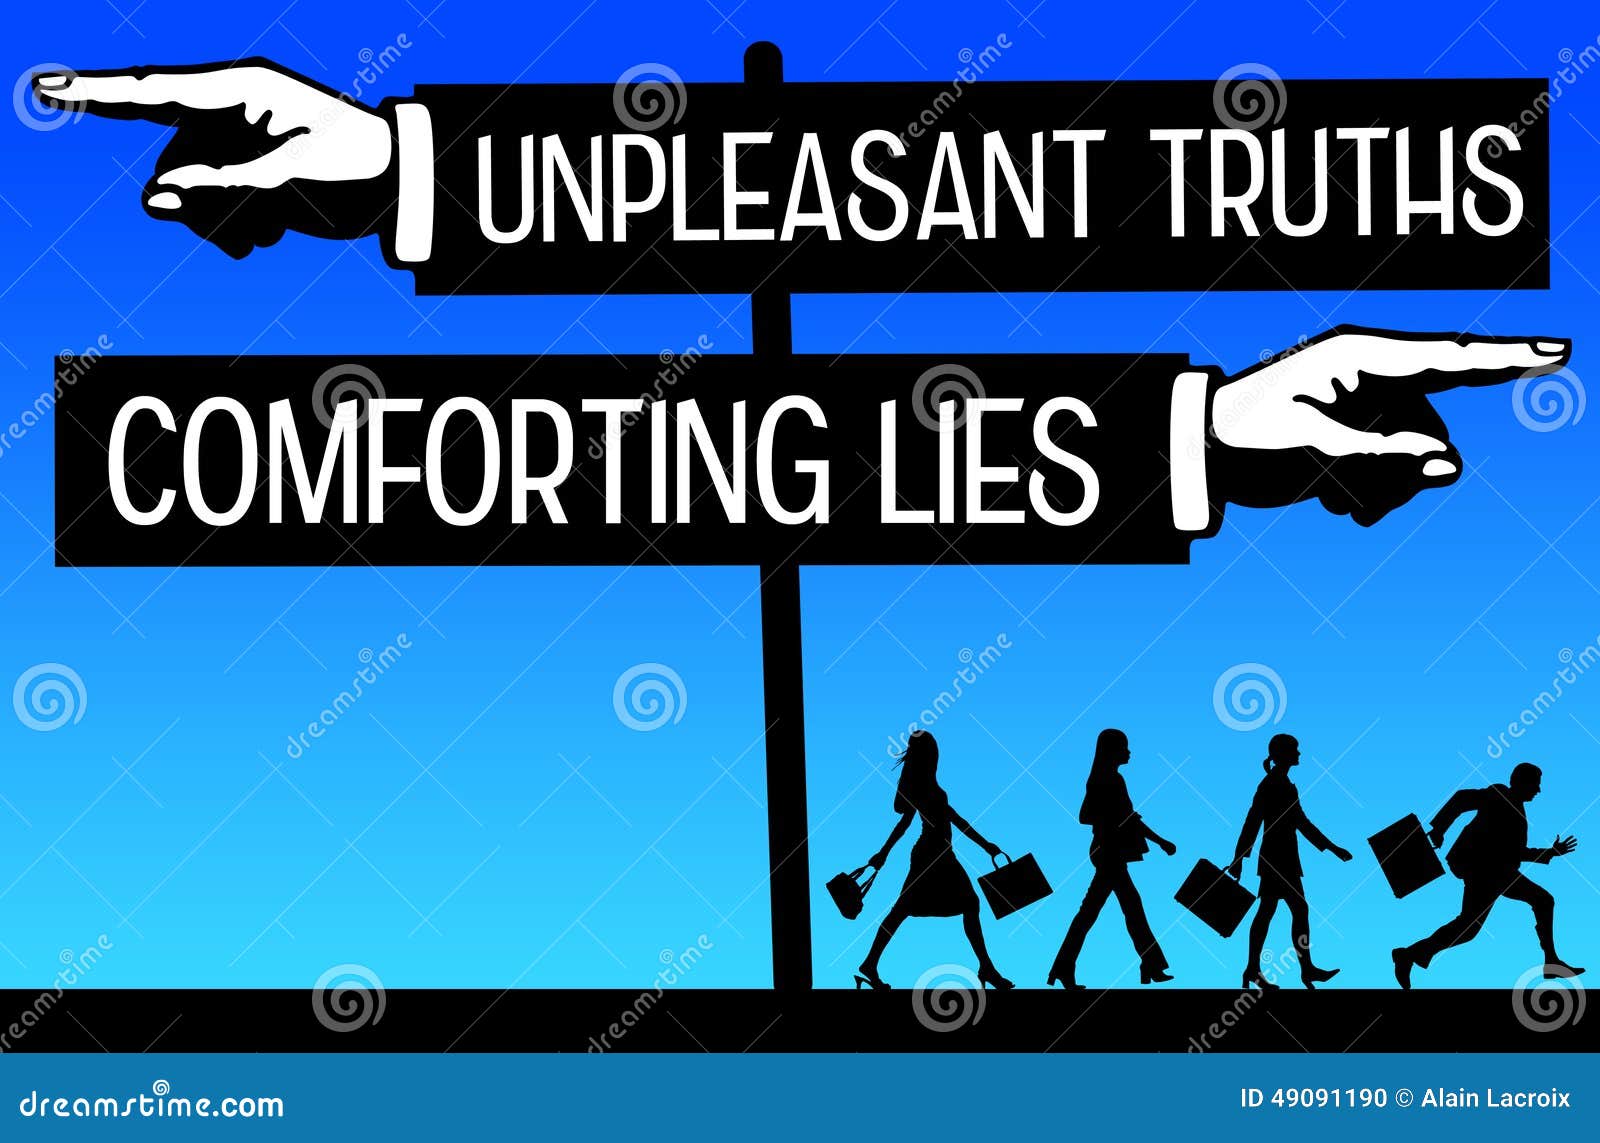 http://thumbs.dreamstime.com/z/truth-lies-people-prefering-comforting-above-unpleasant-truths-49091190.jpg